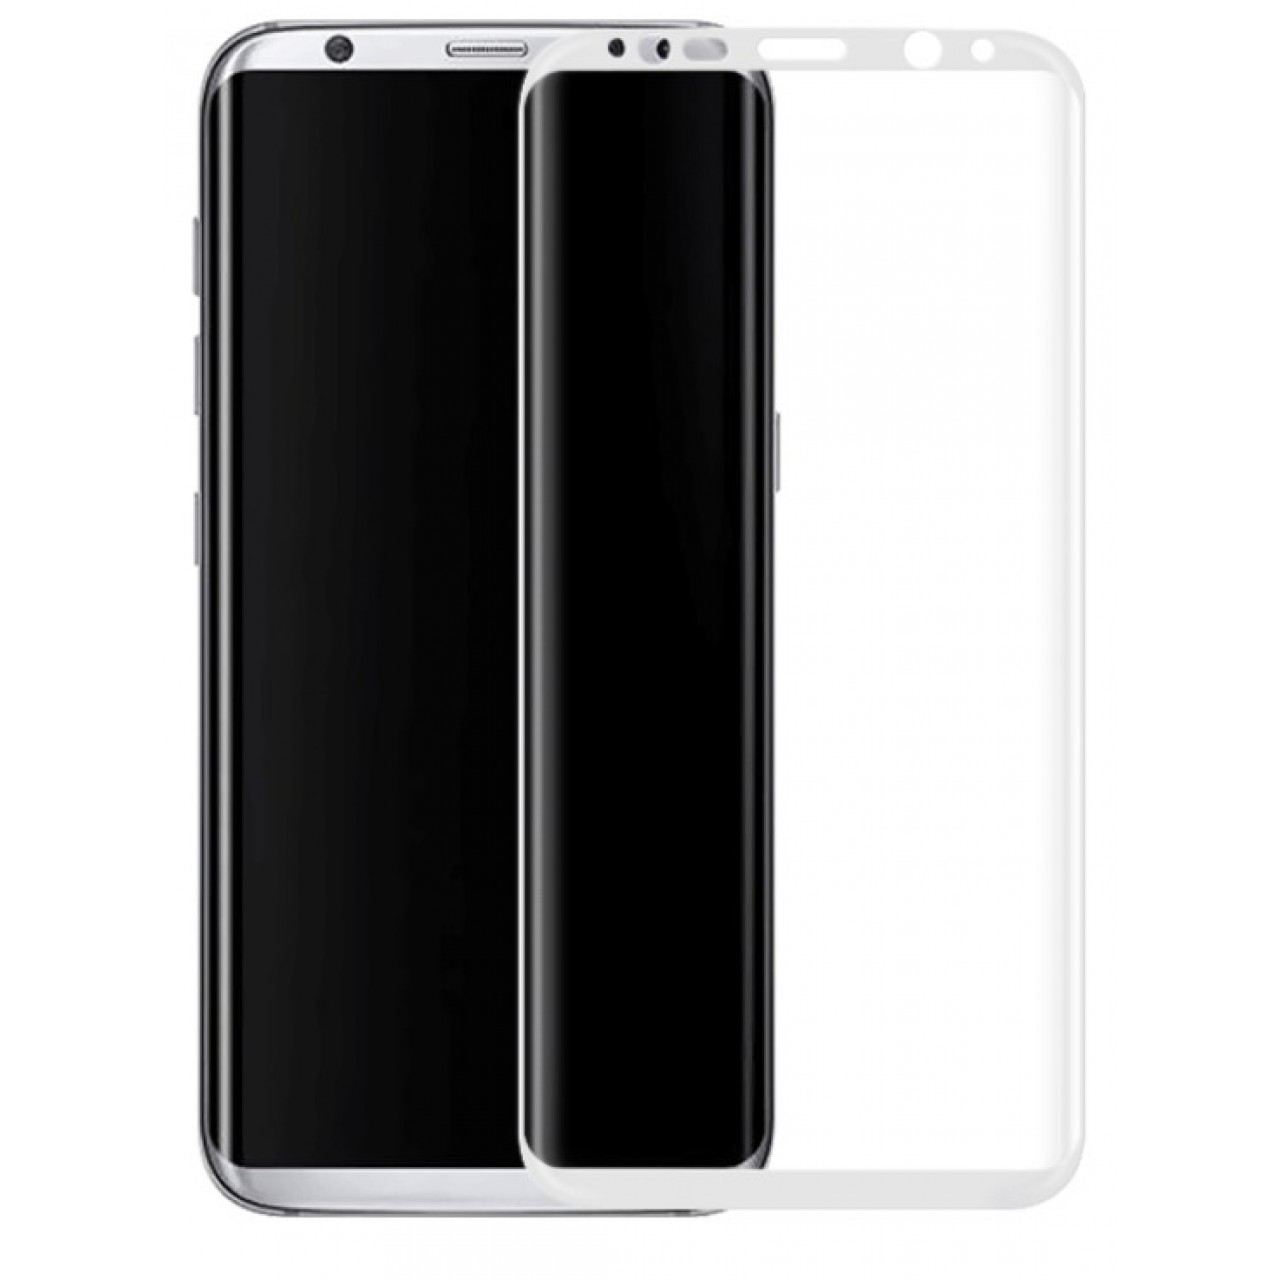 Tempered Glass (Τζάμι) - Προστασία Οθόνης για Samsung Galaxy S8 Plus 0.30mm 9H Full Cover 3D Curved Edge - 2949 - Λευκό - OEM